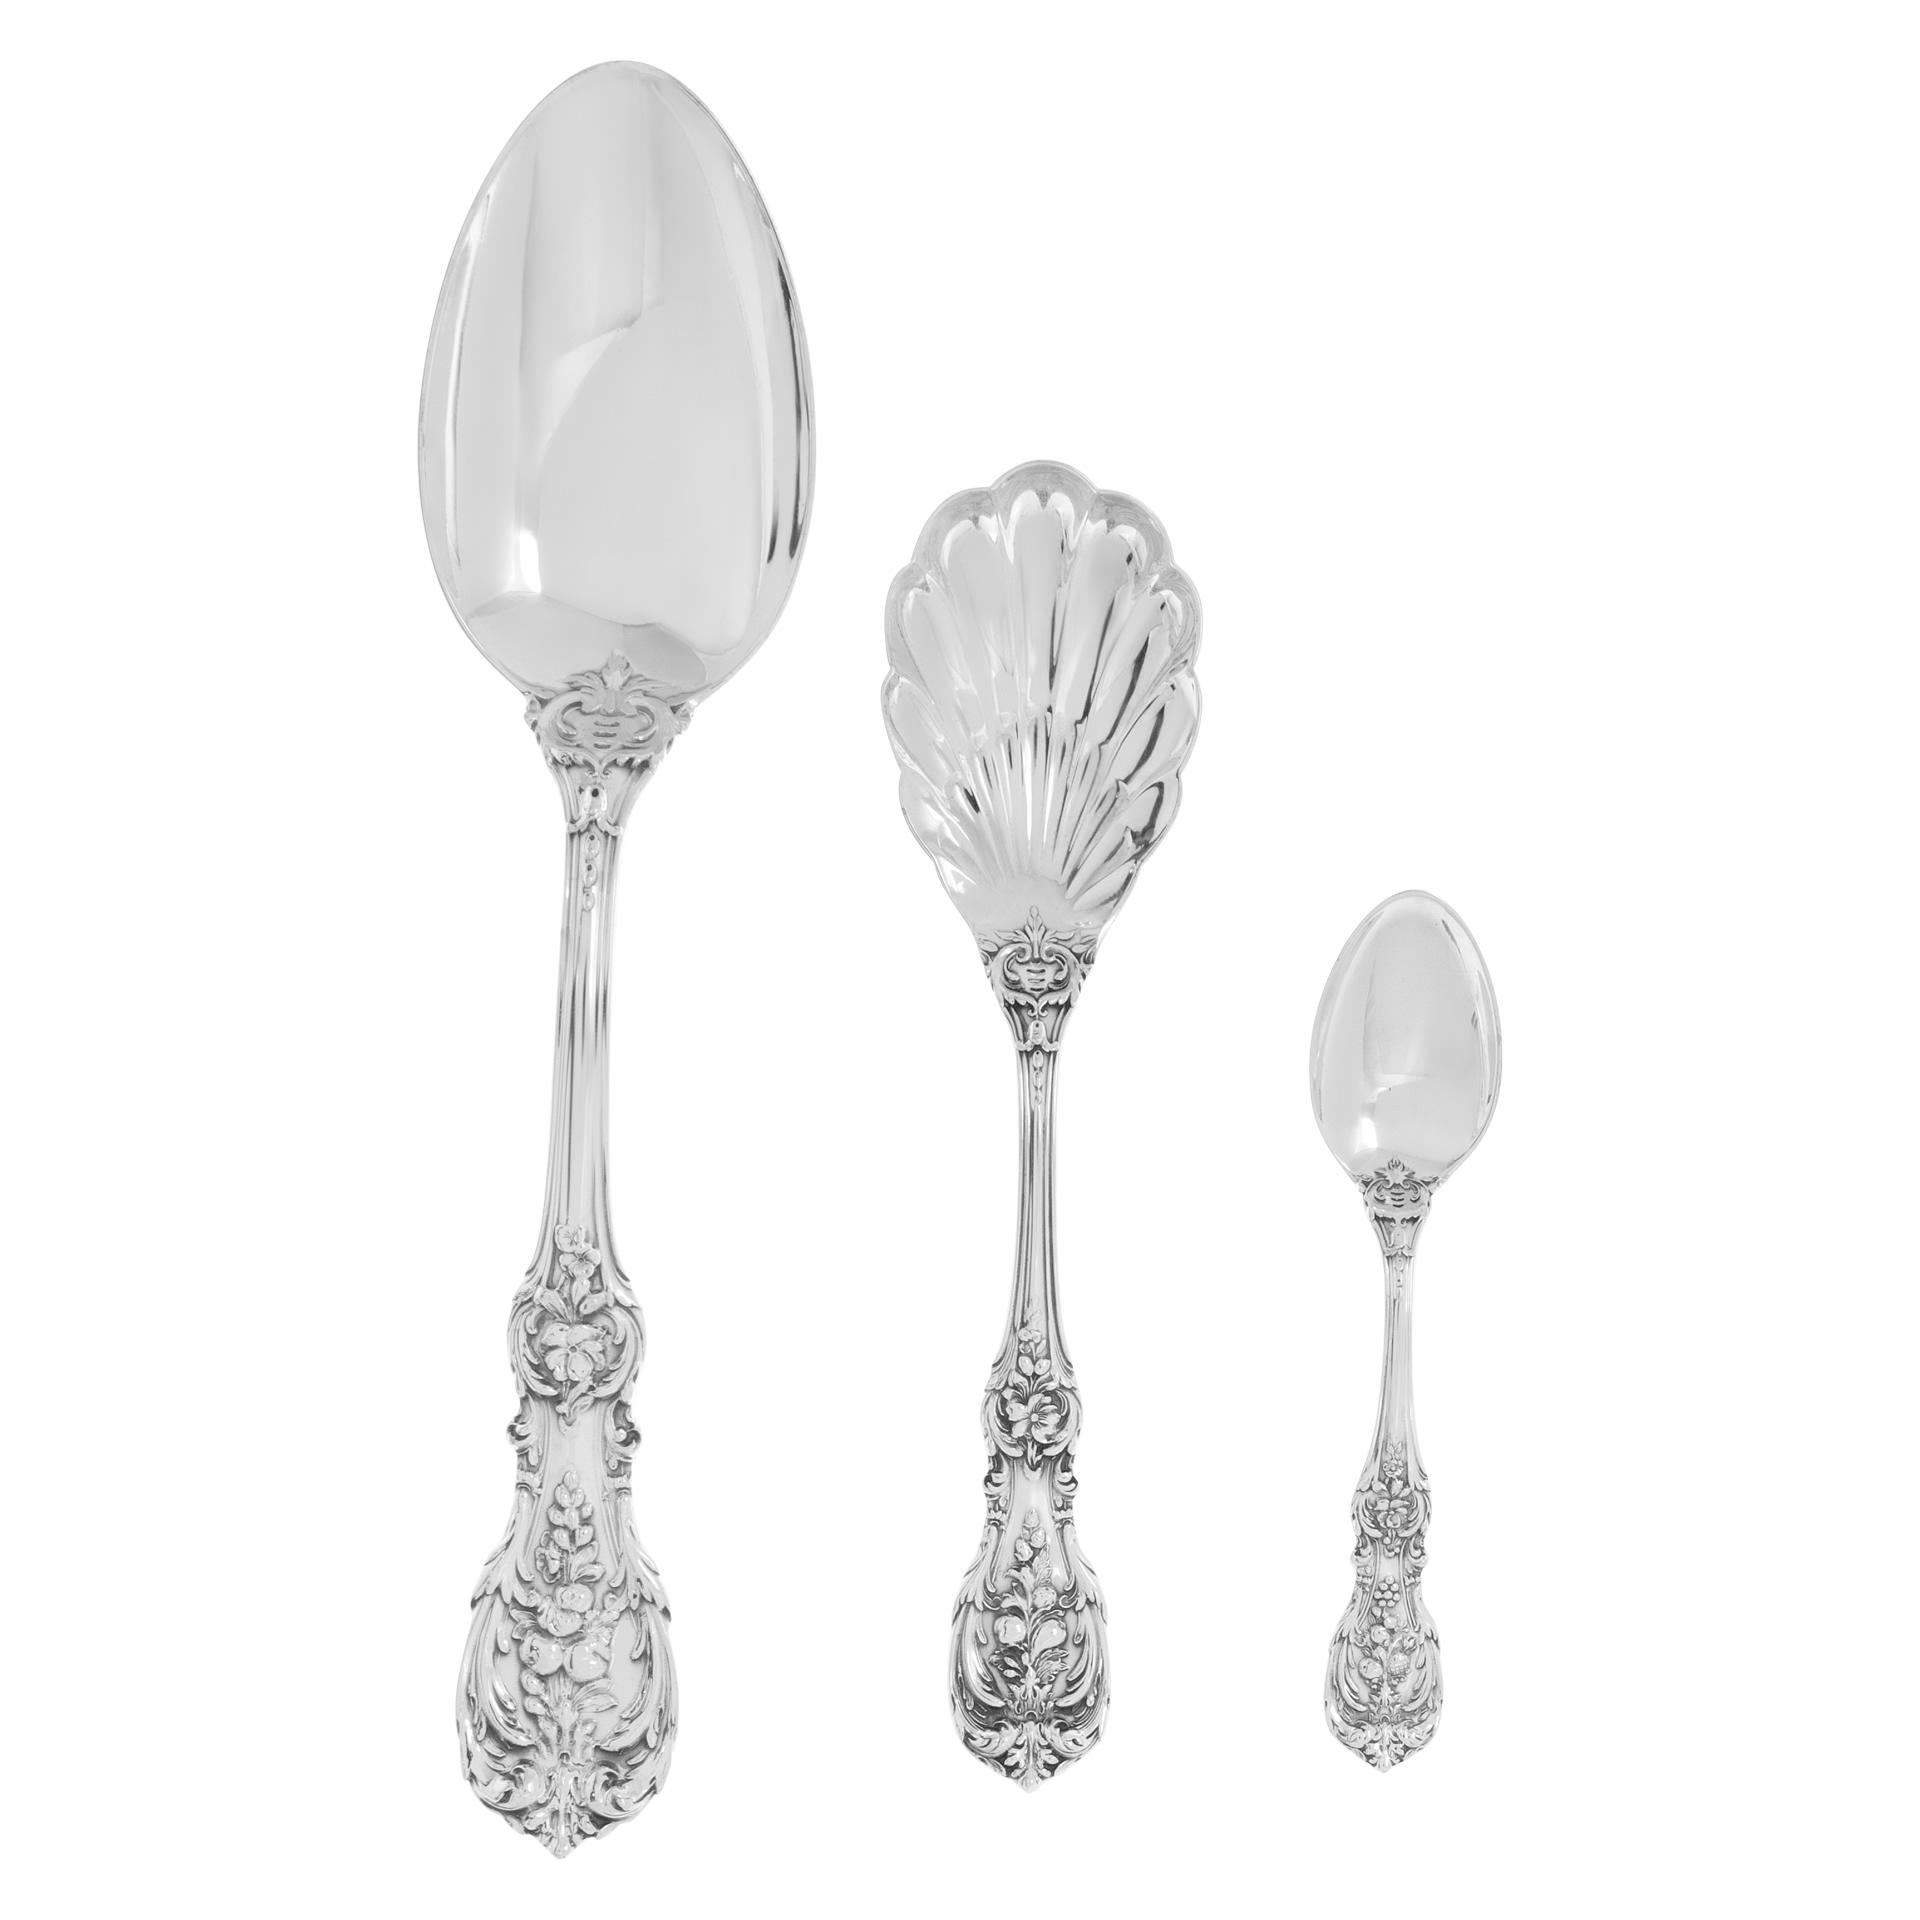 FRANCIS THE FIRST sterling silver flatware set patented in 1907 by Reed & Barton In Excellent Condition For Sale In Surfside, FL